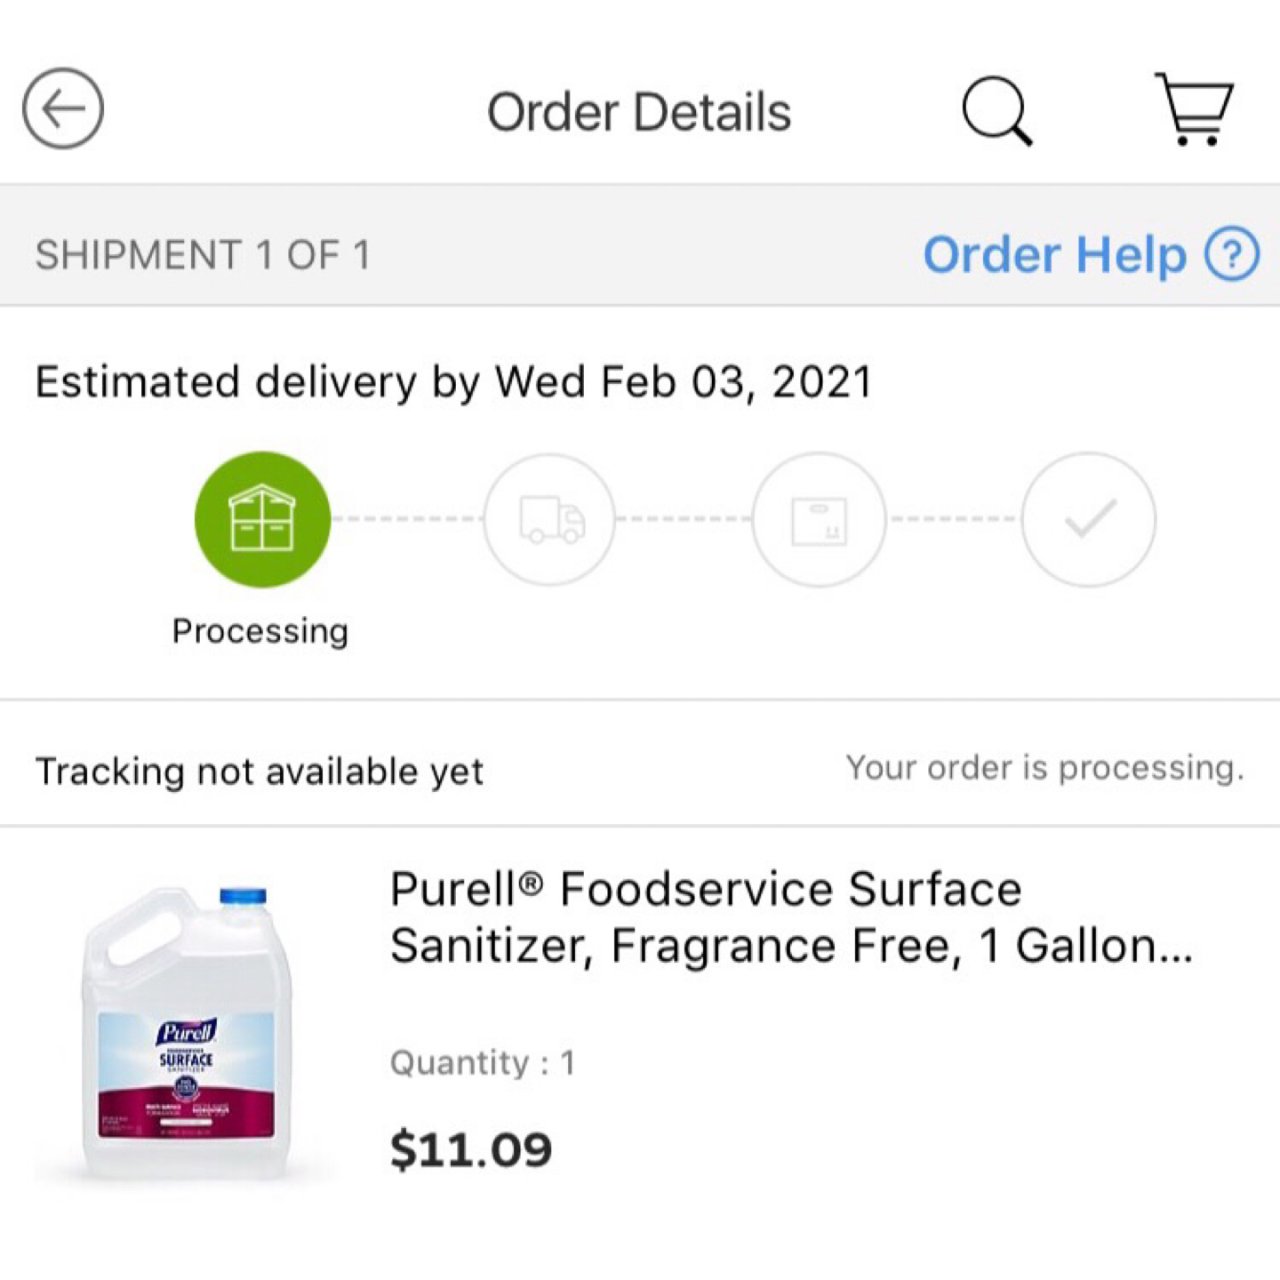 Purell® Foodservice Surface Sanitizer, Fragrance Free, 1 Gallon, Each (4341-04) at Staples